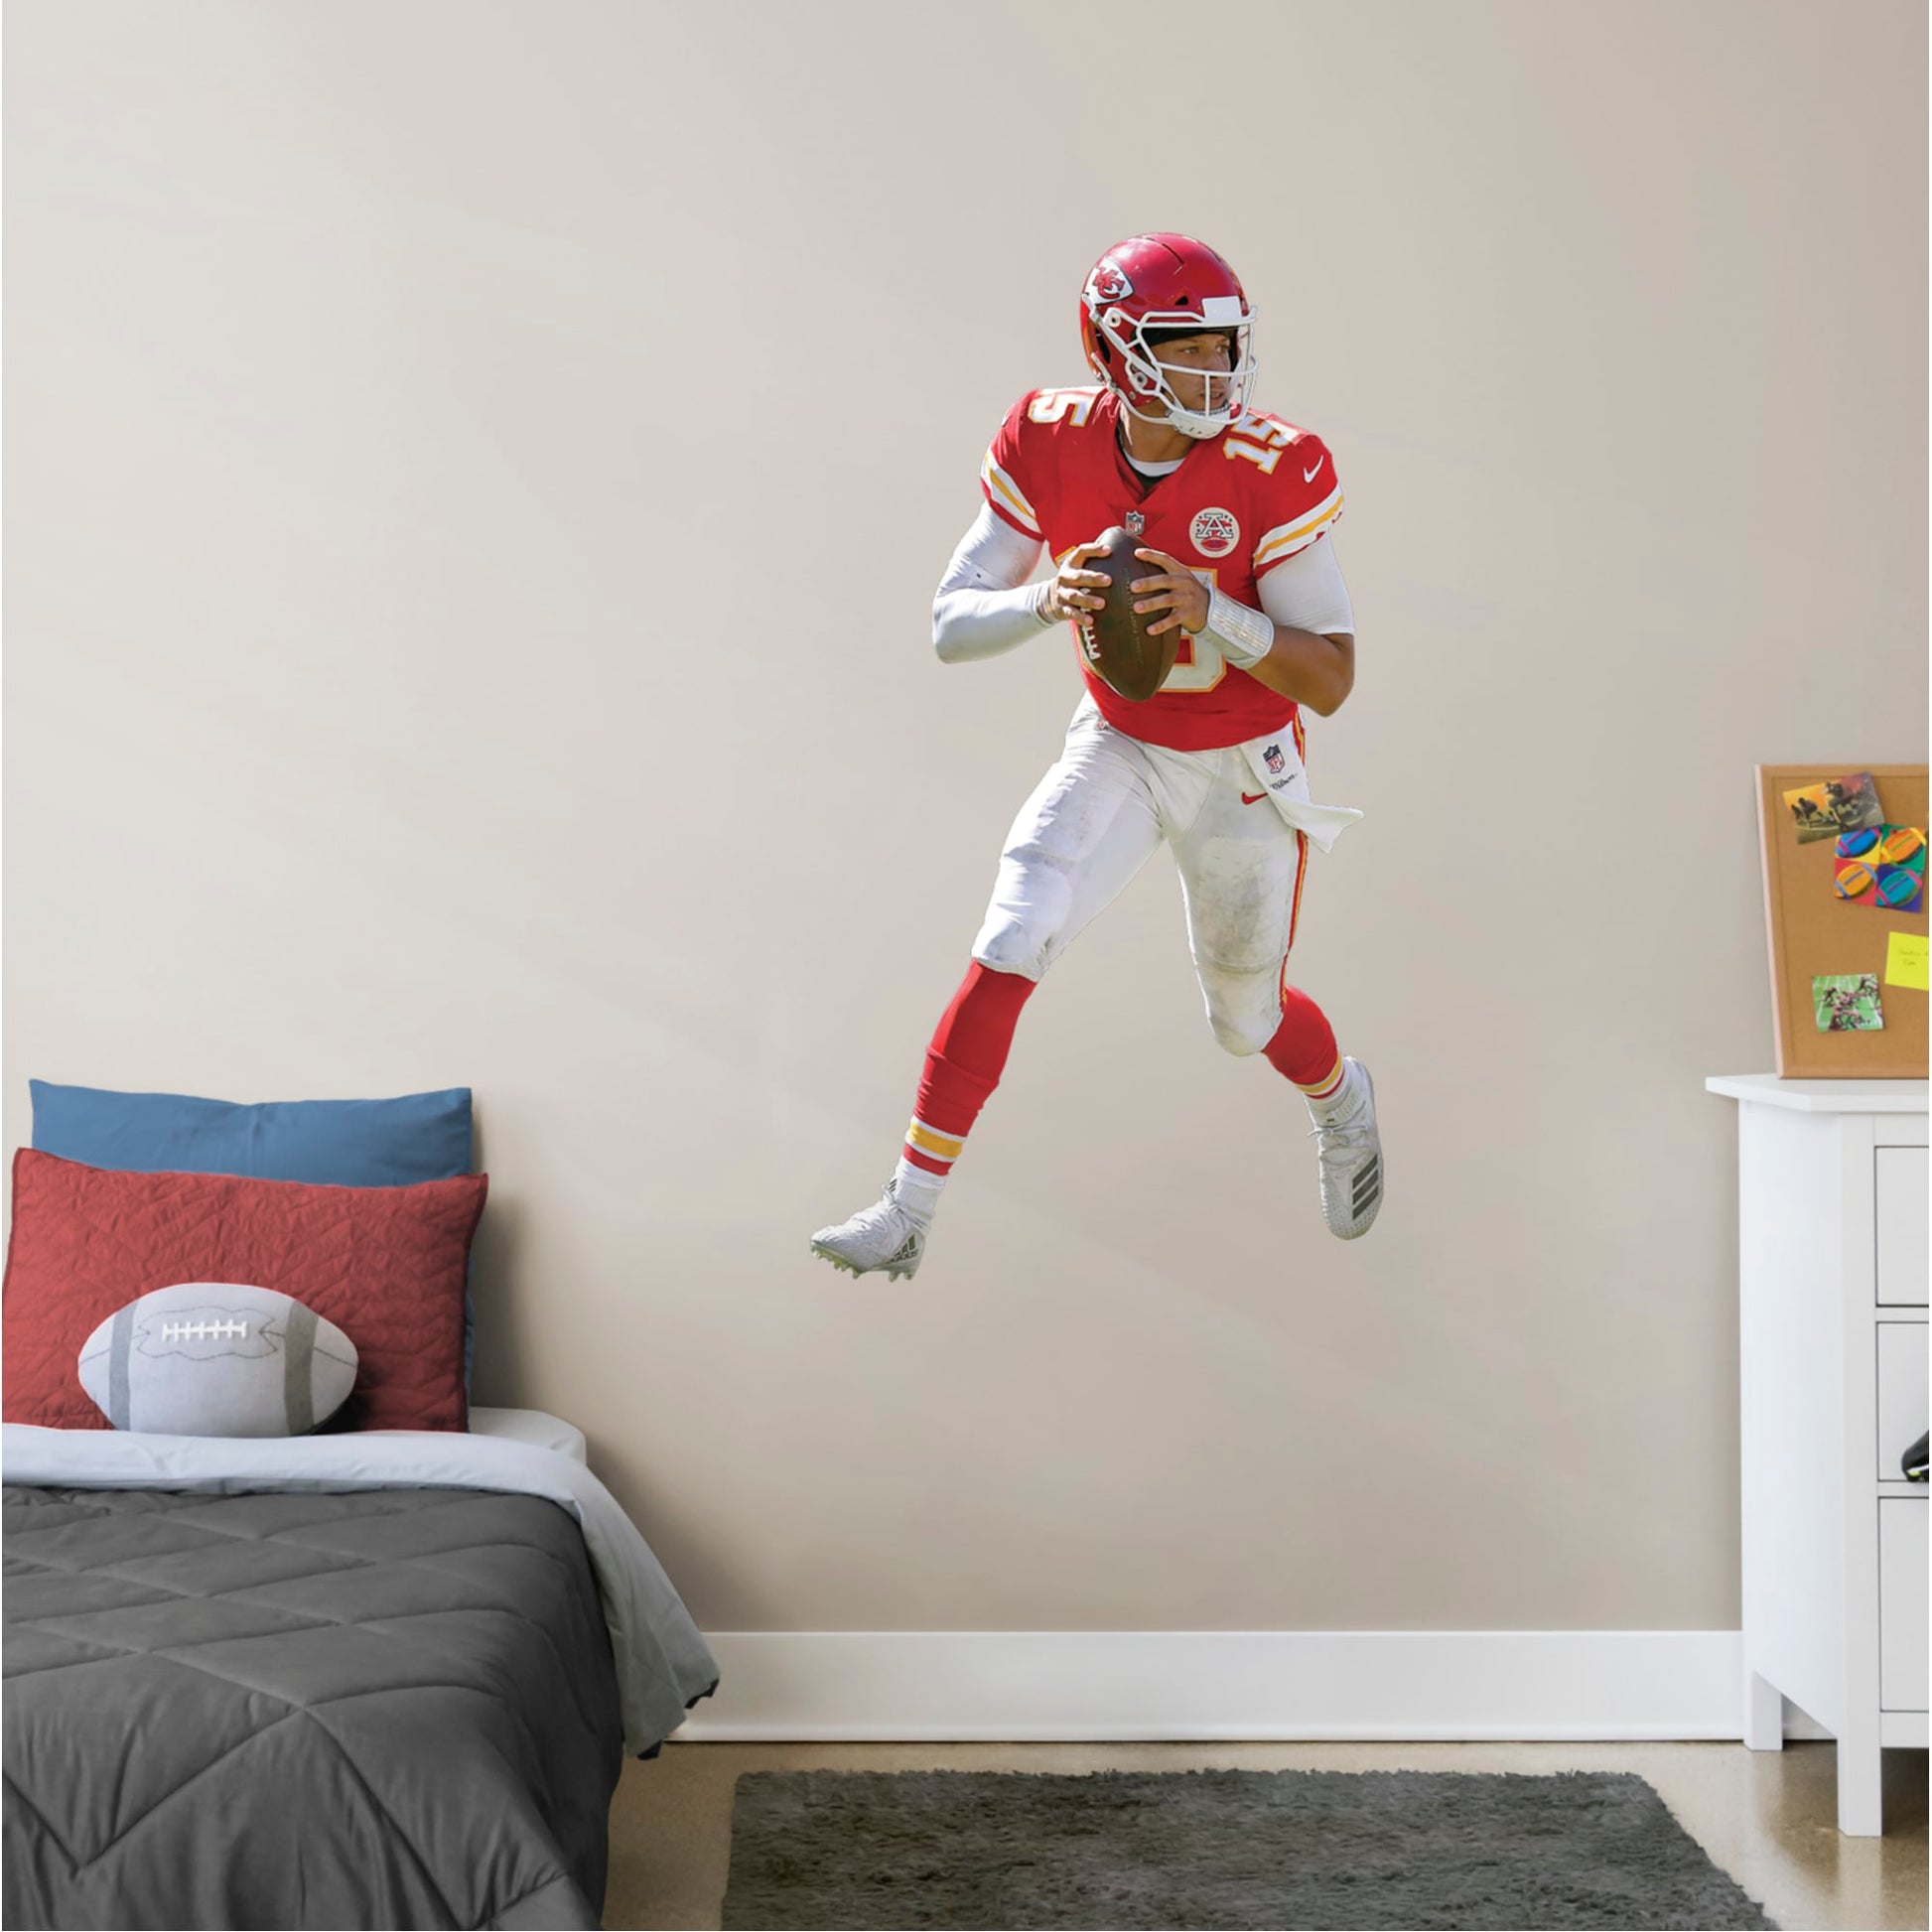 Giant Athlete + 2 Decals (28"W x 51"H) Chiefs fans understand "You Gotta Fight for Your Right To Party," but QB Patrick Mahomes makes winning look easy. The man they call Showtime led KC to the ultimate victory celebration at Super Bowl LIV. Now you can turn your home or office into a Sea of Red with a Patrick Mahomes Removable Wall Decal Collection. The sturdy vinyl, life-size version of the MVP would look good on a bedroom or home office wall. Go ahead, party on!